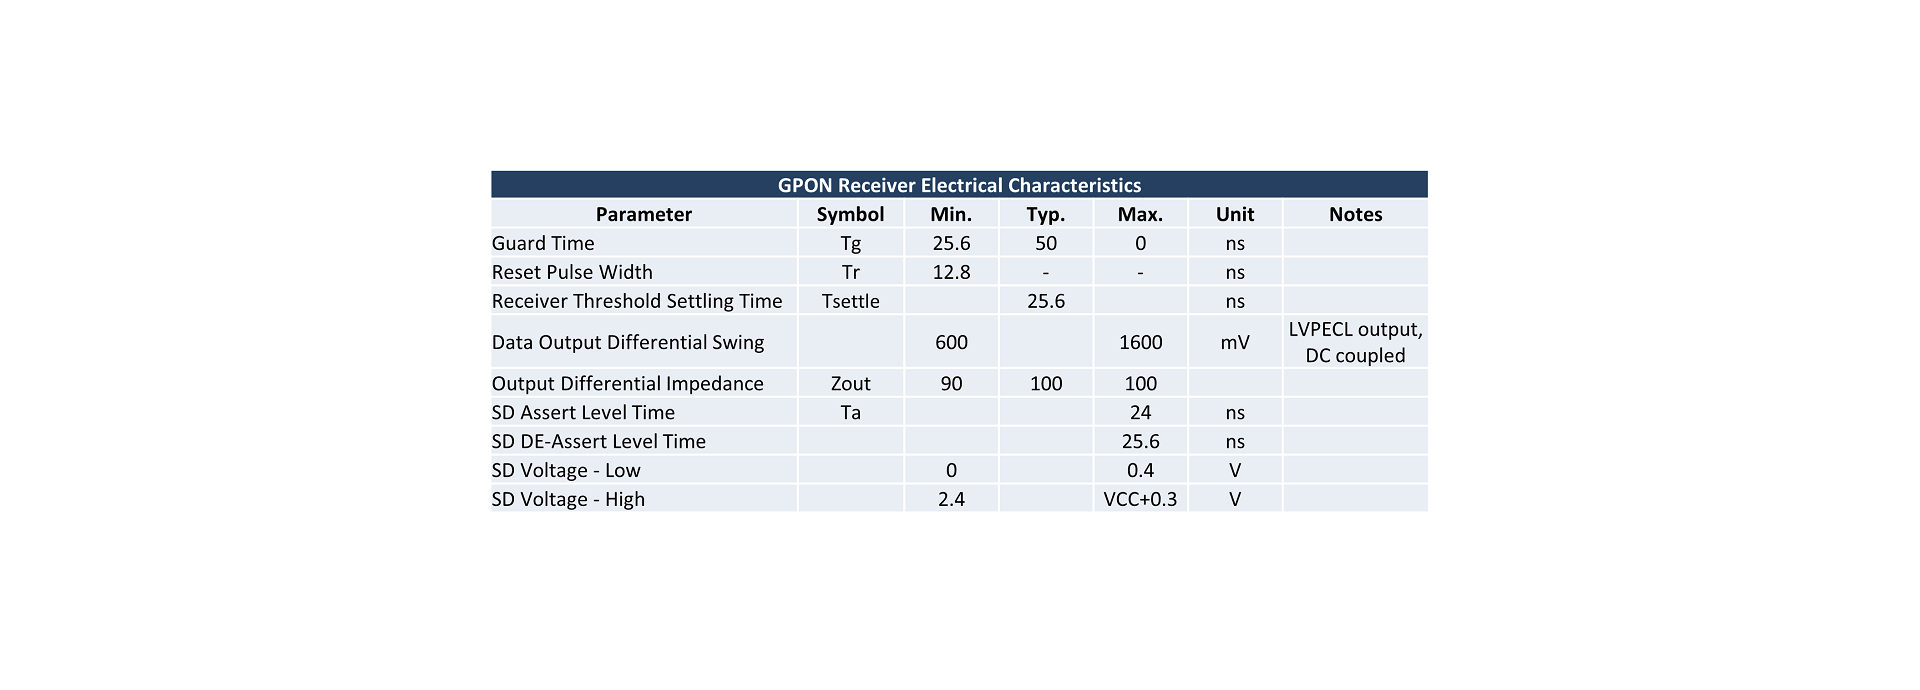 GPON Receiver Electrical Characteristics